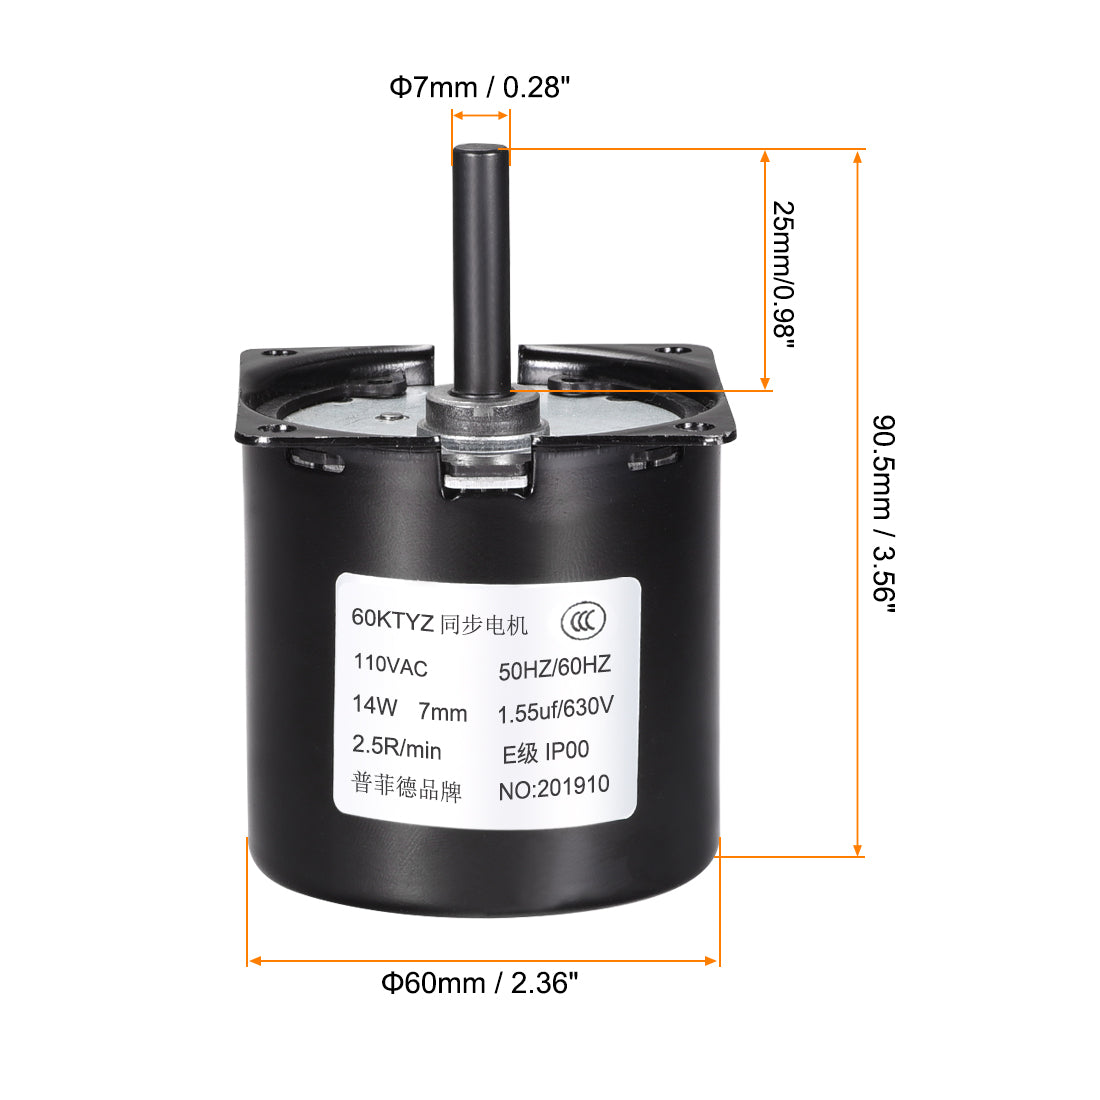 uxcell Uxcell AC 110V Synchronous Motor Metal Gear CW/CCW 2.5RPM 14W 7mm Dia Eccentric Shaft